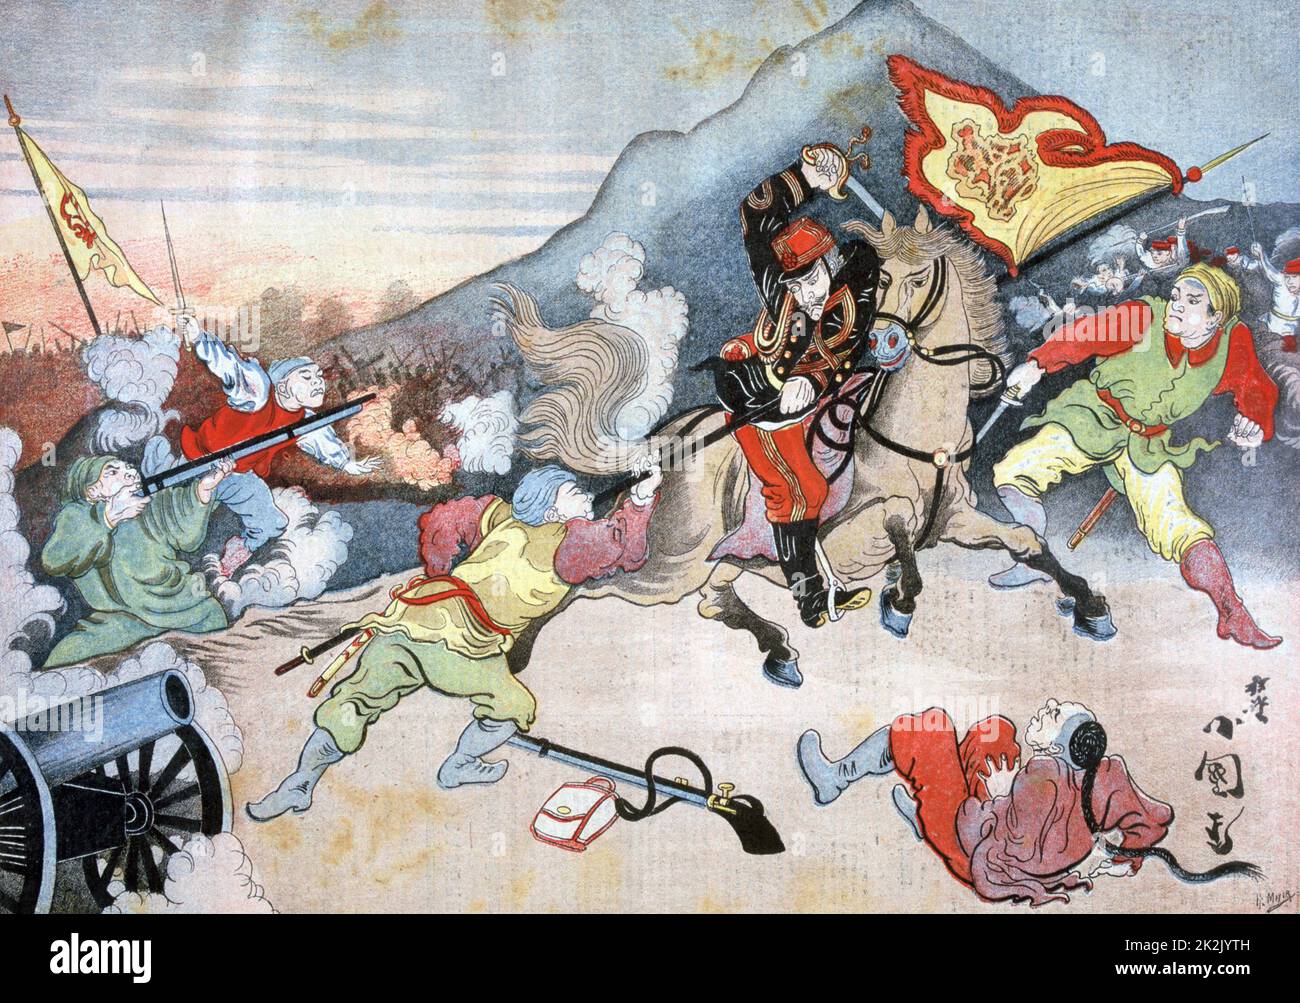 First Sino-Japanese War 1894-1895, fought mainly for control of Korea.  A mounted Japanese office seizing a Chinese flag. Illustration based on a Japanese painting.  From 'Le Petit Journal', Paris, 29 October 1894. Gun, Cannon ,Rifle Stock Photo